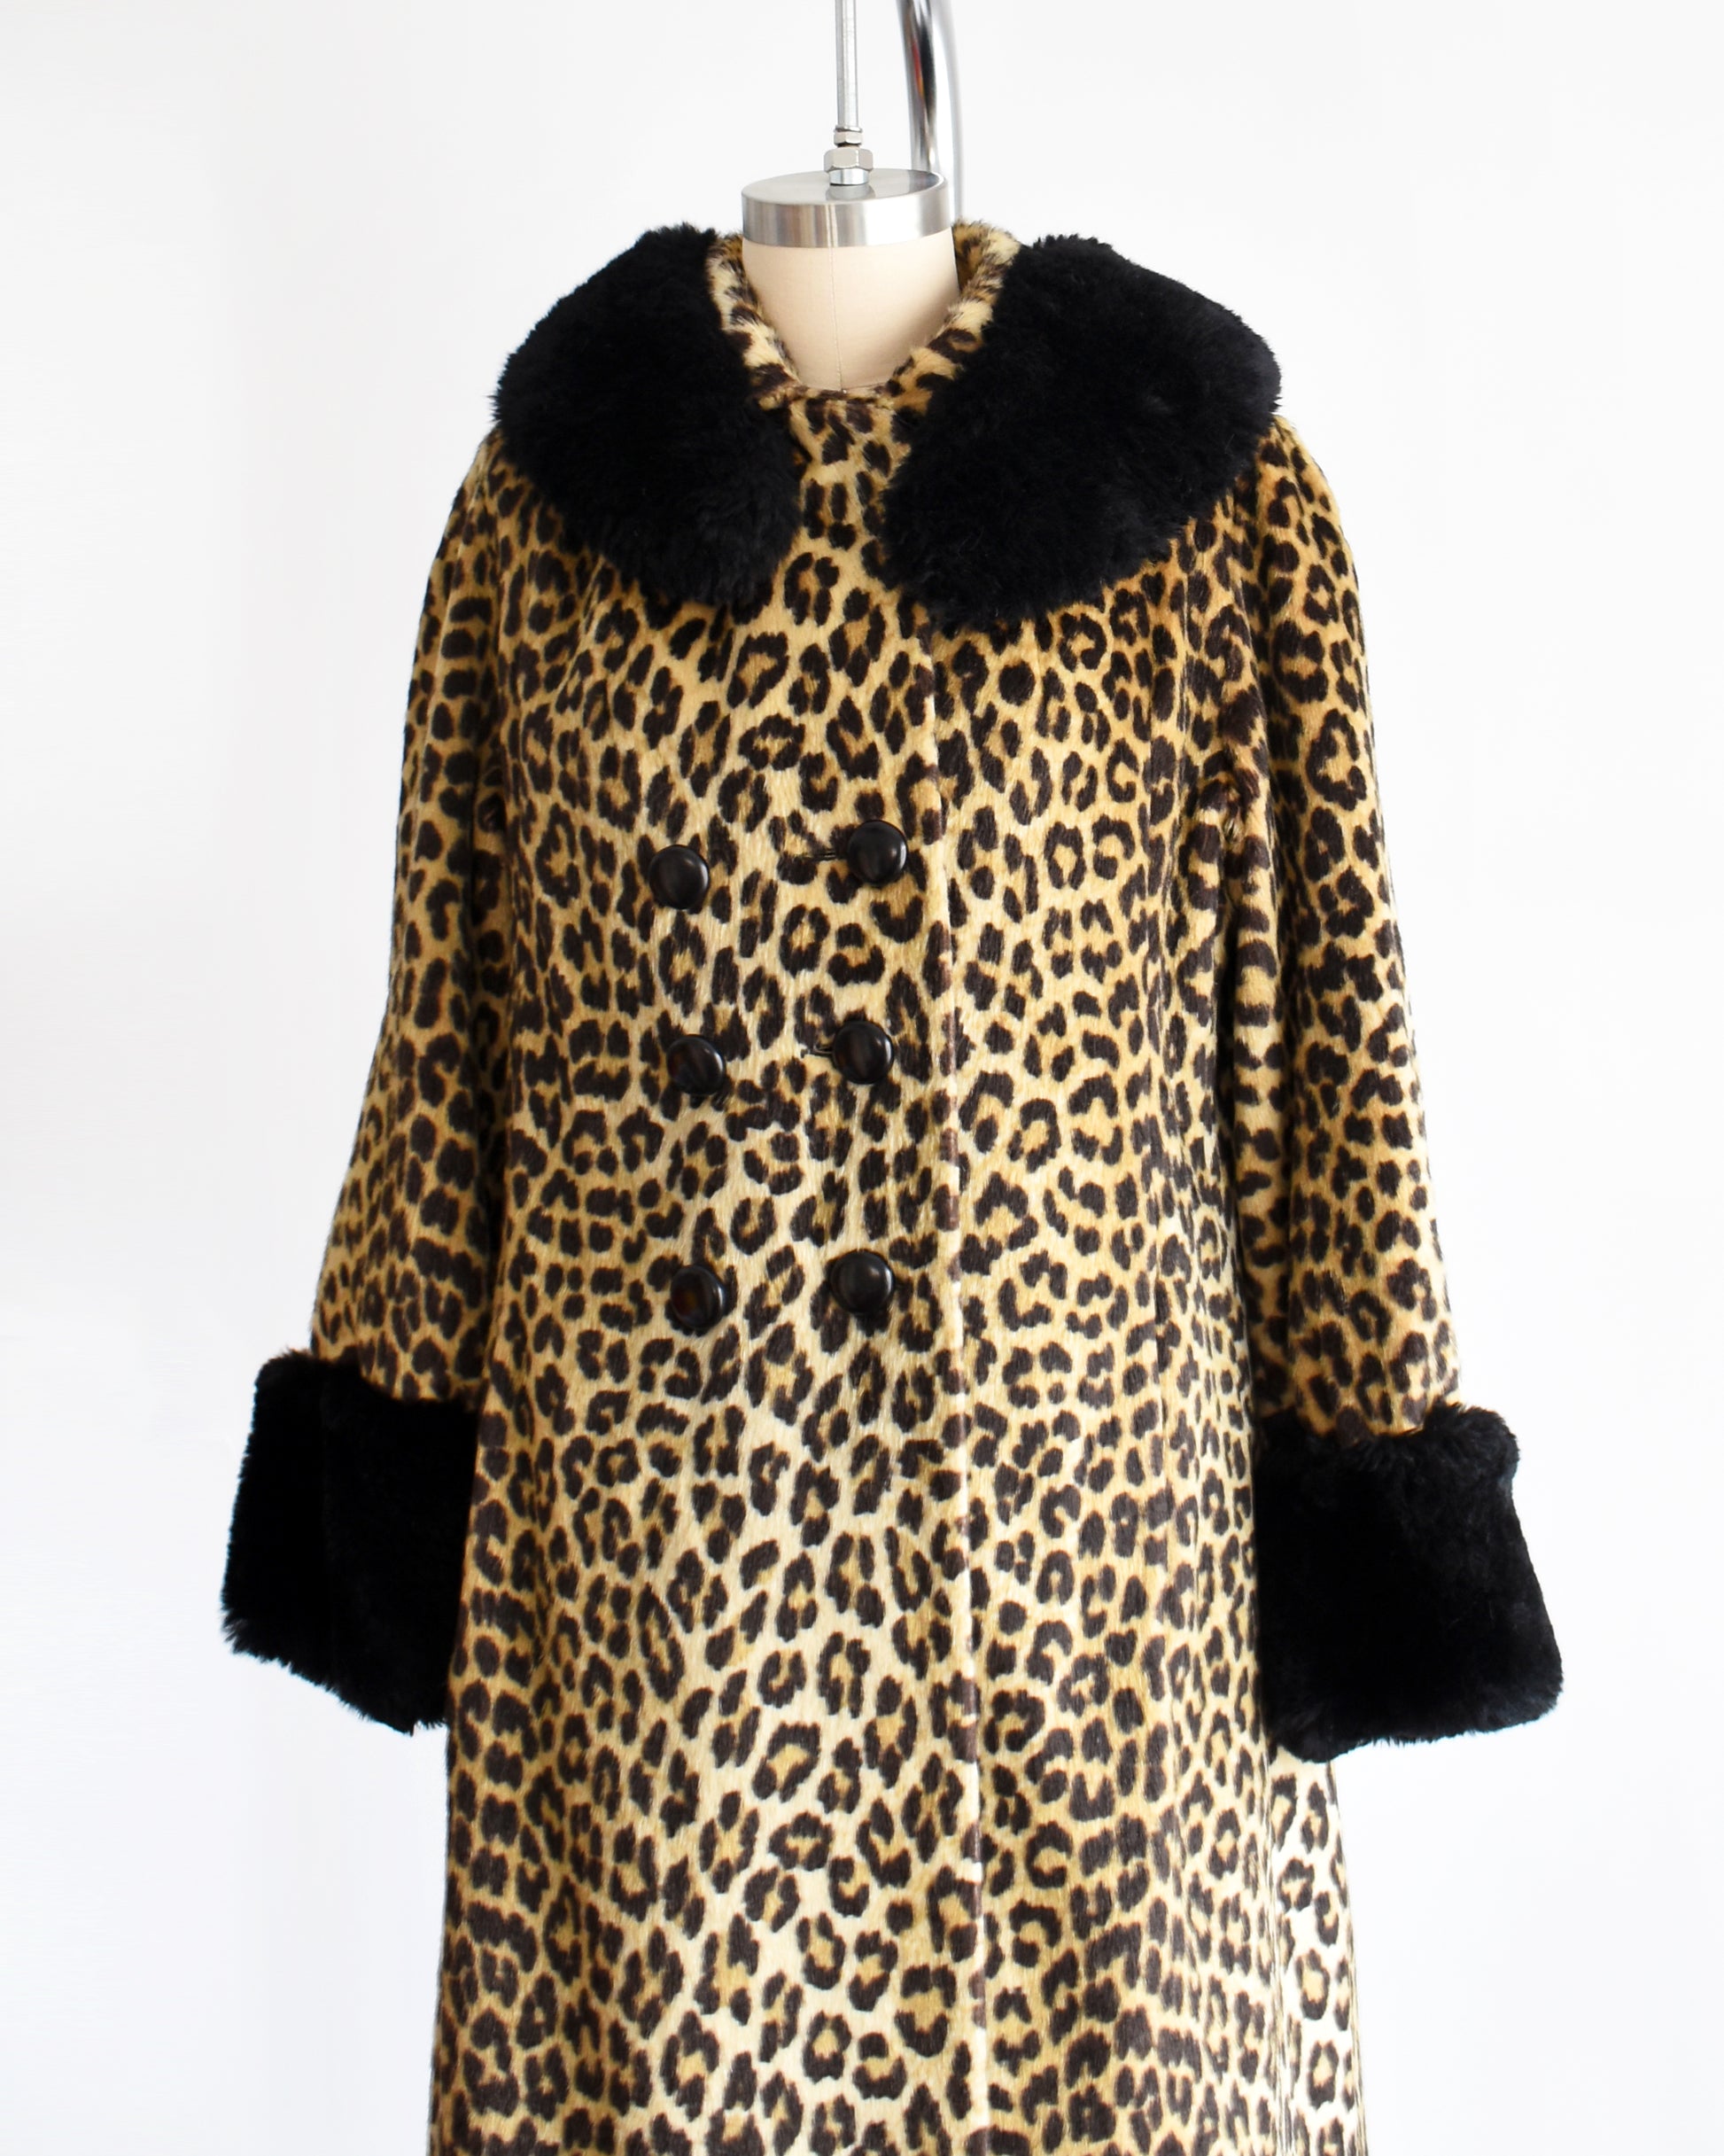 Side front view of a vintage 1960s faux fur leopard print coat. Black plush trim along the collar and on the cuffs. The coat is buttoned all the way up in this photo.